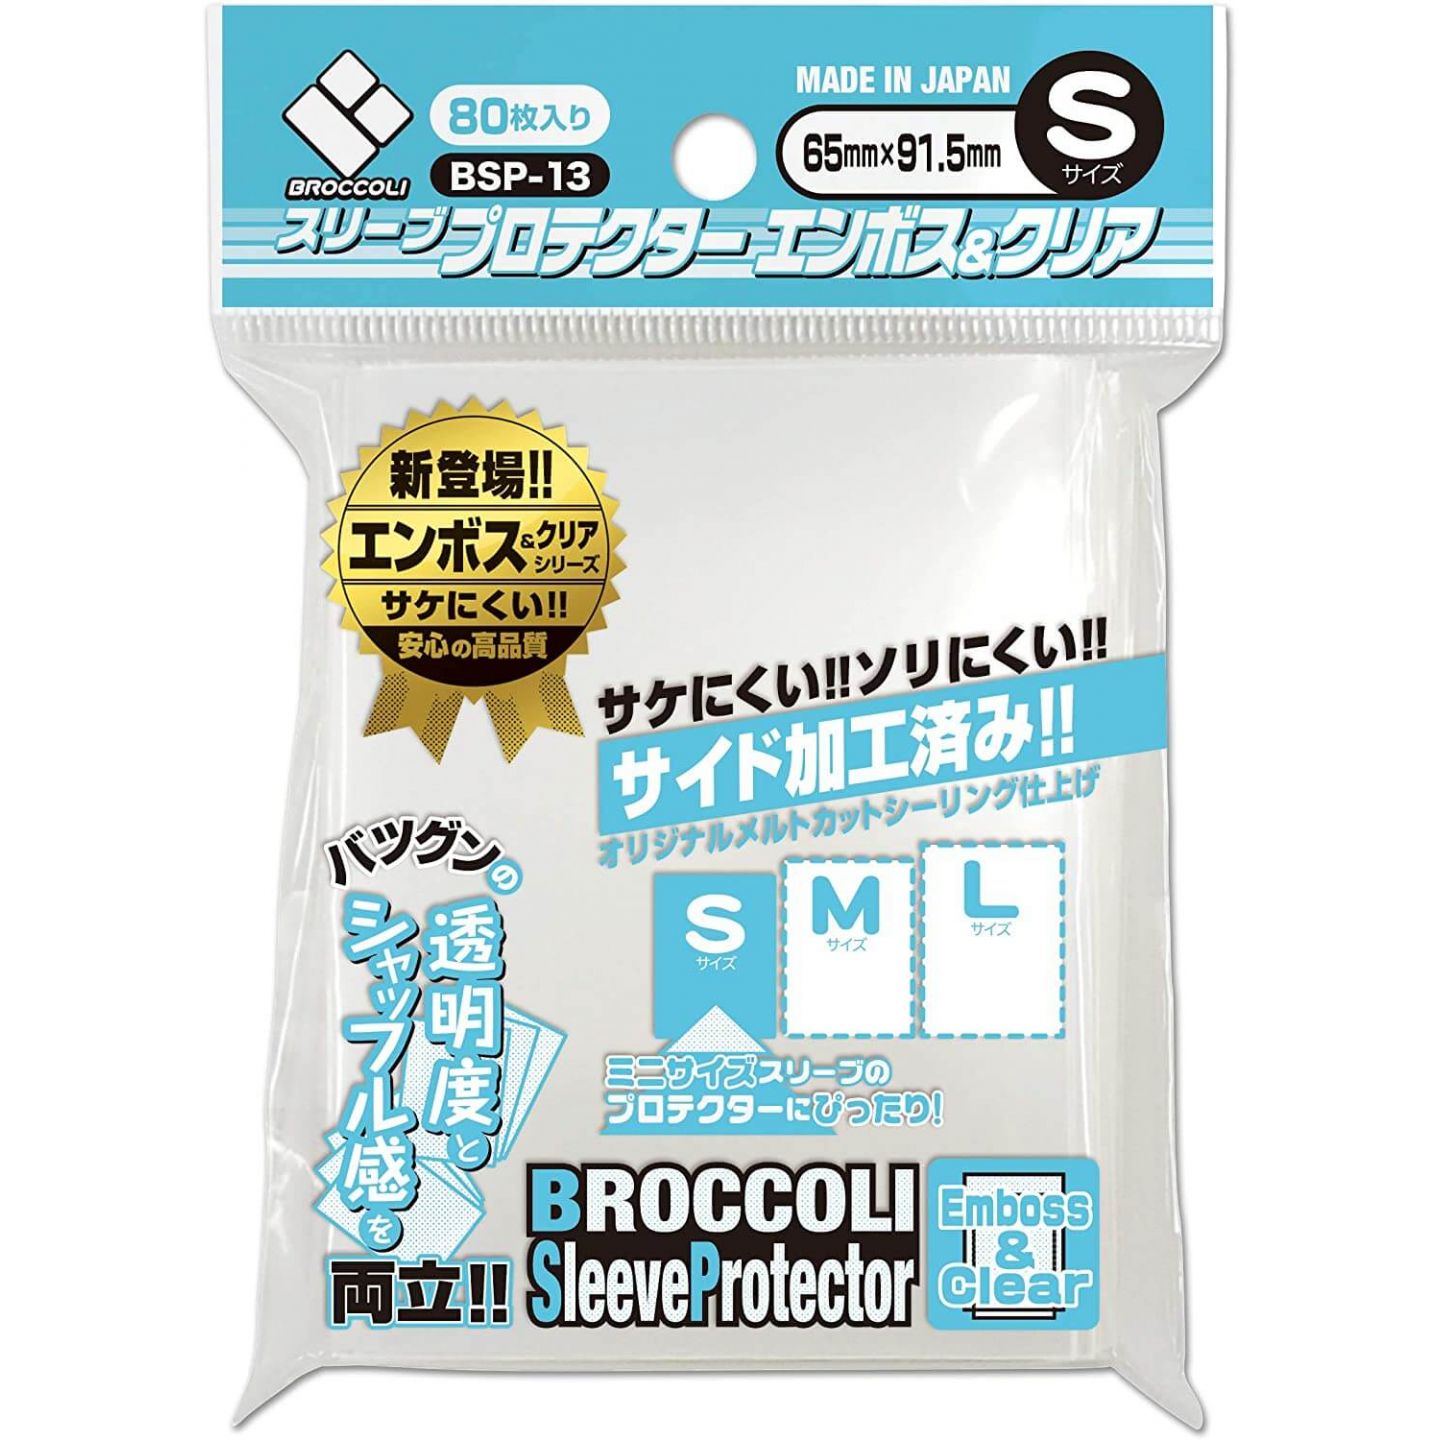 BSP-08 Broccoli Sleeve Protector Mat and Clear M 